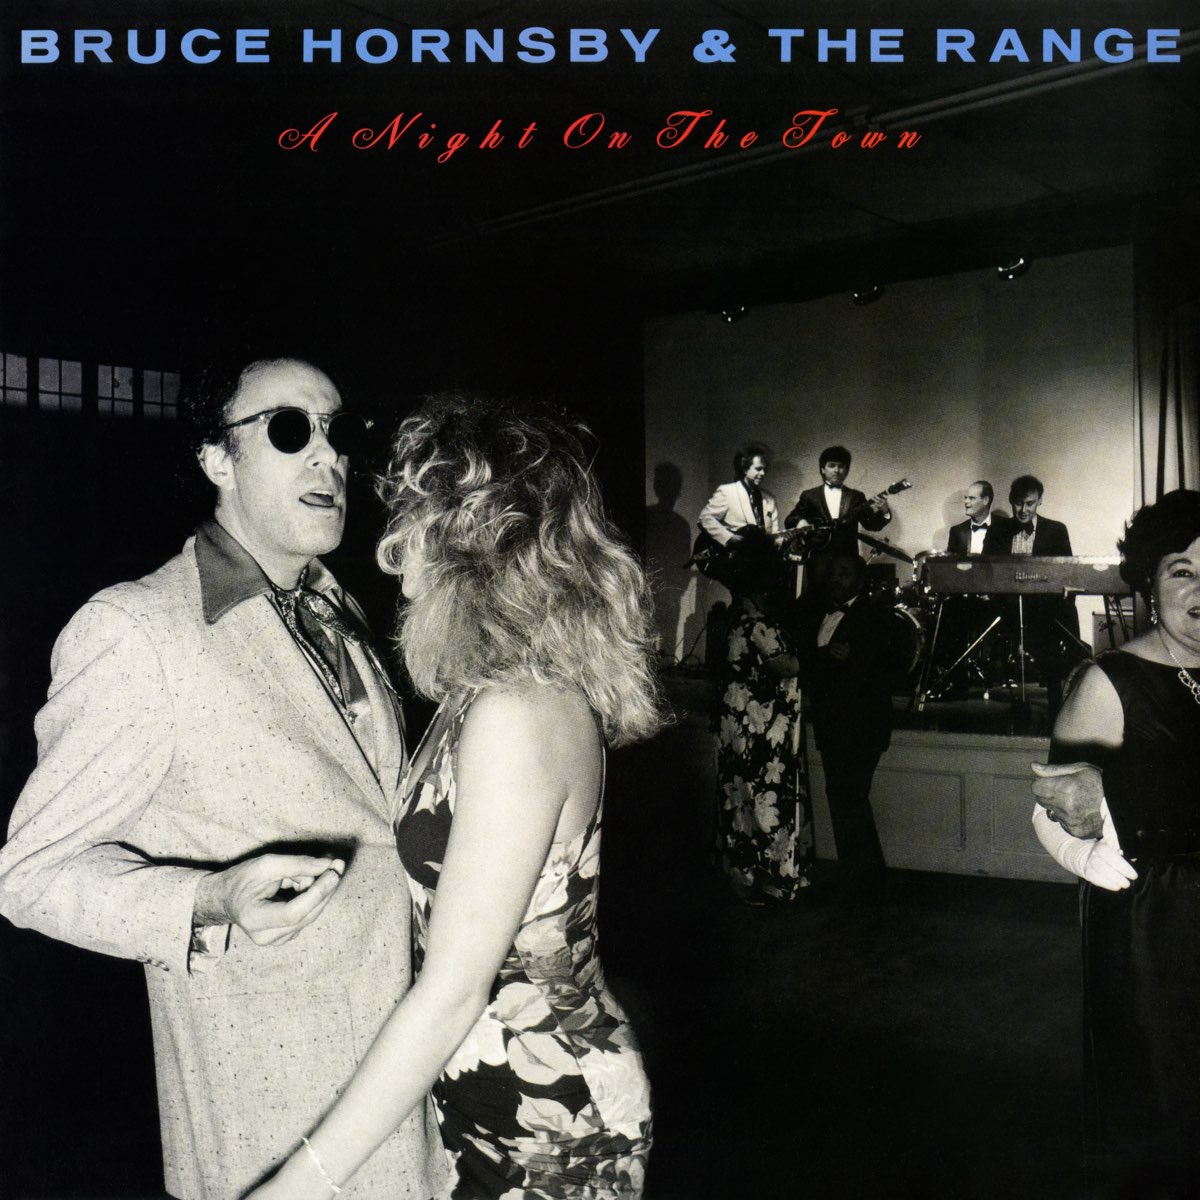 Night On the Town - Album by Bruce Hornsby & The Range - Apple Music